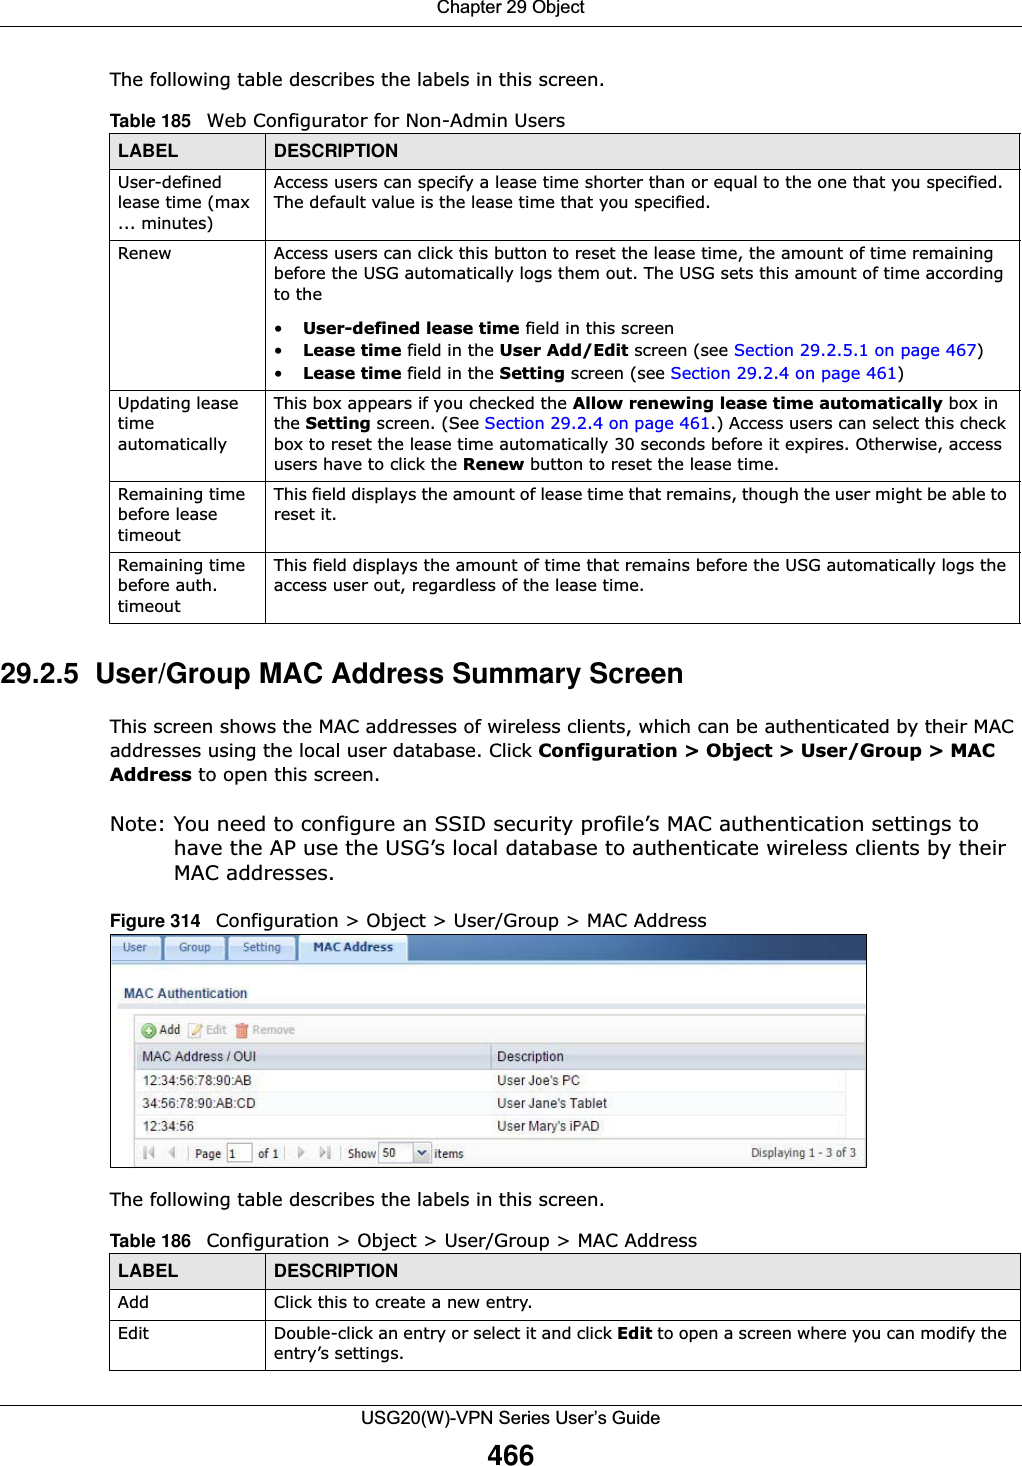 Chapter 29 ObjectUSG20(W)-VPN Series User’s Guide466The following table describes the labels in this screen.  29.2.5  User/Group MAC Address Summary Screen This screen shows the MAC addresses of wireless clients, which can be authenticated by their MAC addresses using the local user database. Click Configuration &gt; Object &gt; User/Group &gt; MAC Address to open this screen.Note: You need to configure an SSID security profile’s MAC authentication settings to have the AP use the USG’s local database to authenticate wireless clients by their MAC addresses.Figure 314   Configuration &gt; Object &gt; User/Group &gt; MAC AddressThe following table describes the labels in this screen.  Table 185   Web Configurator for Non-Admin UsersLABEL DESCRIPTIONUser-defined lease time (max ... minutes)Access users can specify a lease time shorter than or equal to the one that you specified. The default value is the lease time that you specified.Renew Access users can click this button to reset the lease time, the amount of time remaining before the USG automatically logs them out. The USG sets this amount of time according to the•User-defined lease time field in this screen•Lease time field in the User Add/Edit screen (see Section 29.2.5.1 on page 467)•Lease time field in the Setting screen (see Section 29.2.4 on page 461)Updating lease time automaticallyThis box appears if you checked the Allow renewing lease time automatically box in the Setting screen. (See Section 29.2.4 on page 461.) Access users can select this check box to reset the lease time automatically 30 seconds before it expires. Otherwise, access users have to click the Renew button to reset the lease time.Remaining time before lease timeoutThis field displays the amount of lease time that remains, though the user might be able to reset it.Remaining time before auth. timeoutThis field displays the amount of time that remains before the USG automatically logs the access user out, regardless of the lease time.Table 186   Configuration &gt; Object &gt; User/Group &gt; MAC Address LABEL DESCRIPTIONAdd Click this to create a new entry.Edit Double-click an entry or select it and click Edit to open a screen where you can modify the entry’s settings. 